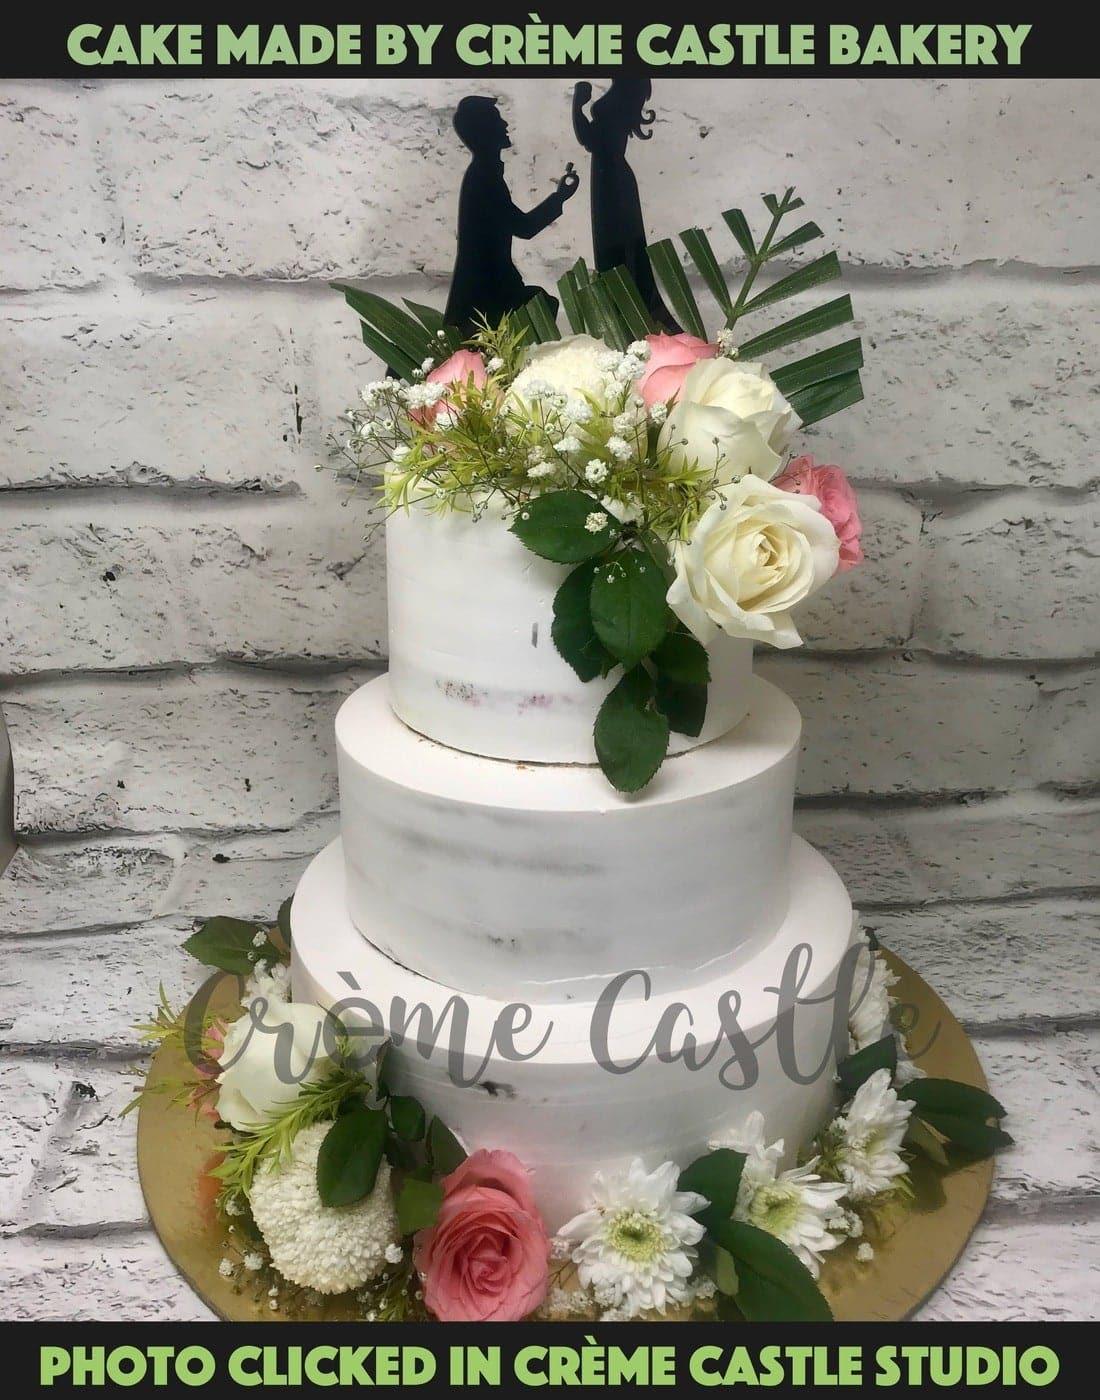 3-Tier Engagement Ring Cake – Cakes All The Way